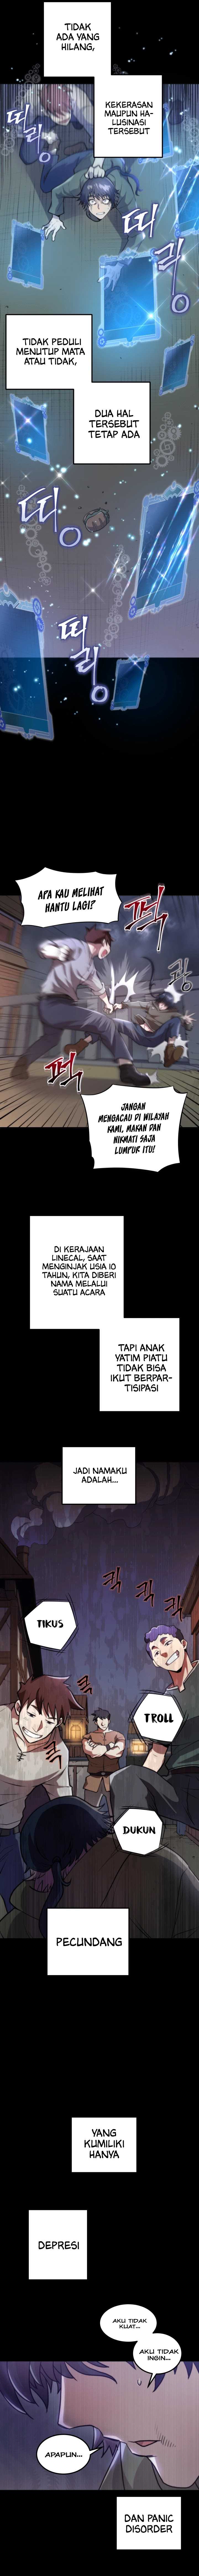 1RM’s Gigant Rider Chapter 01